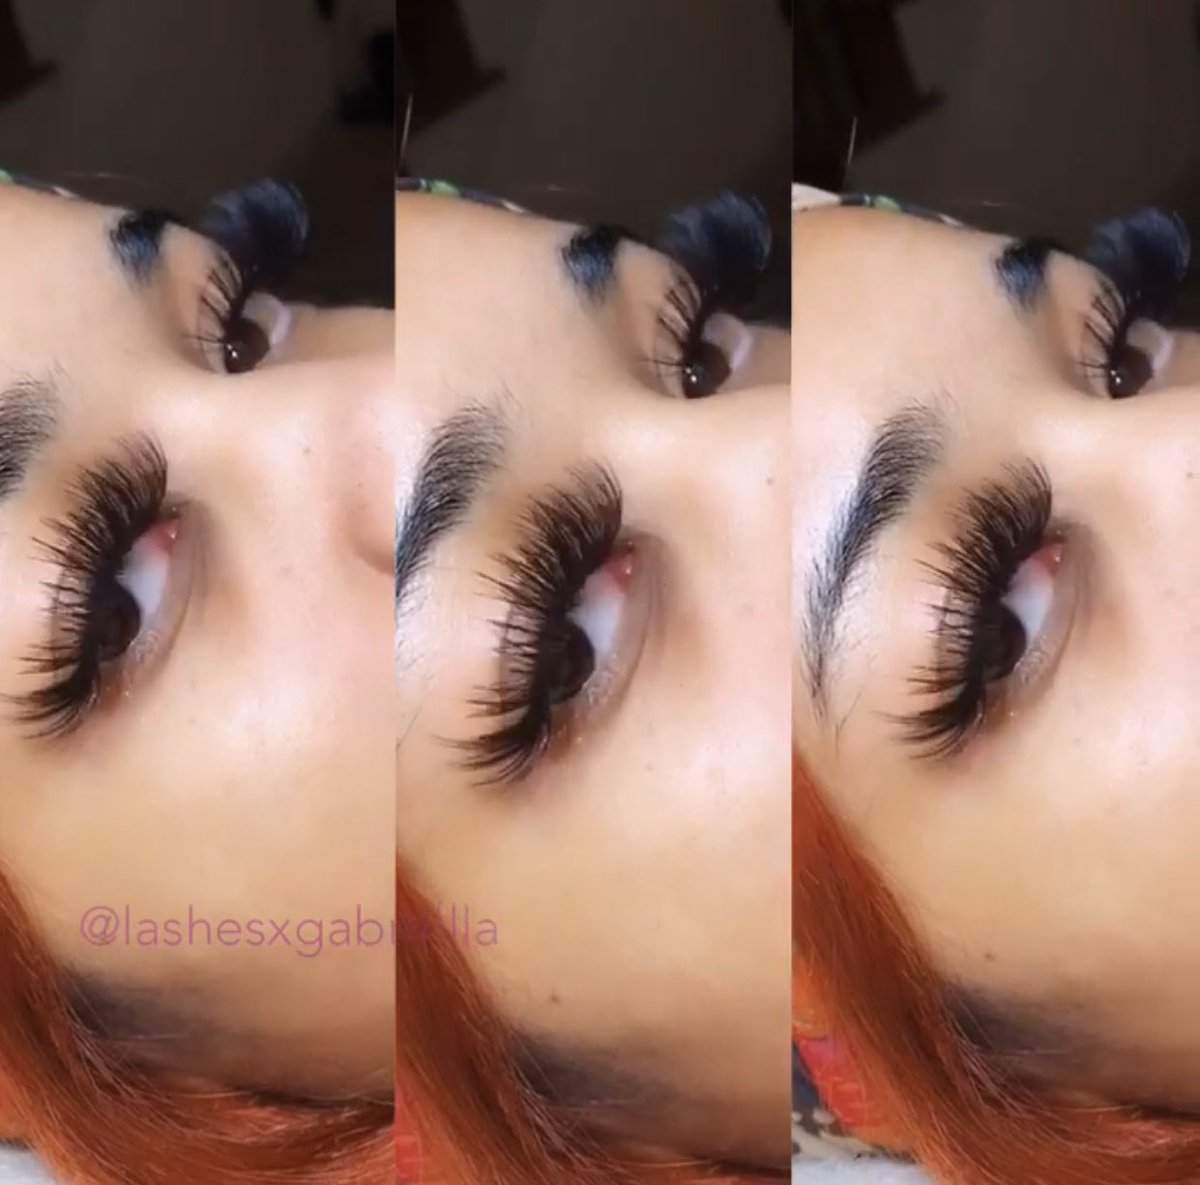 It your in the Atlanta area and need your lashes done book with my sis!!!💕💕she’ll get you right most defff!
Ig: @lashesxgabriella 
#atllashtech